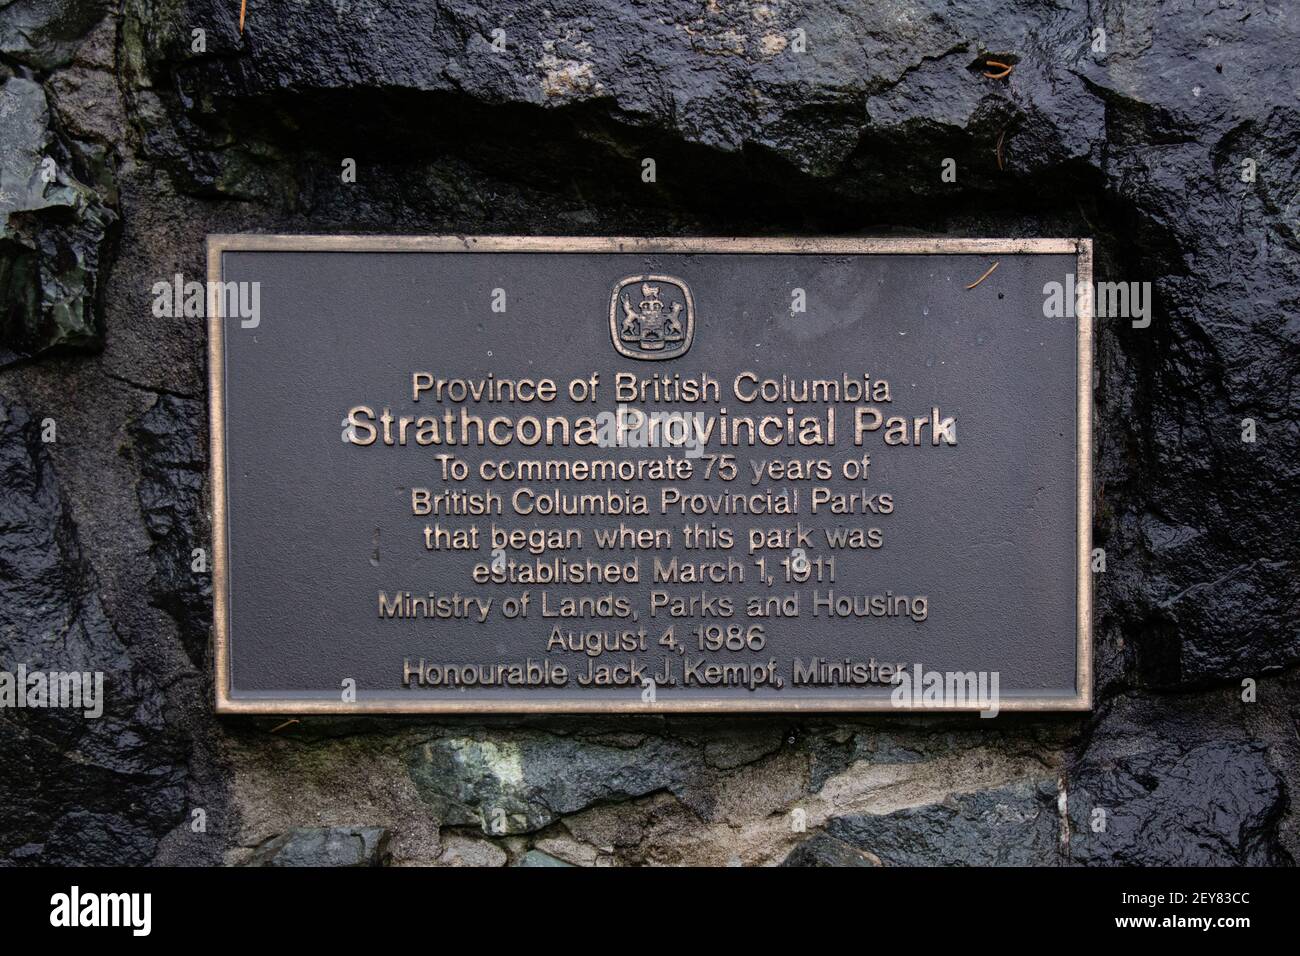 Vancouver Island, Canada - November 17,2020: View of Information Board (Plaque) Strathcona Provincial Park on a stone wall Stock Photo